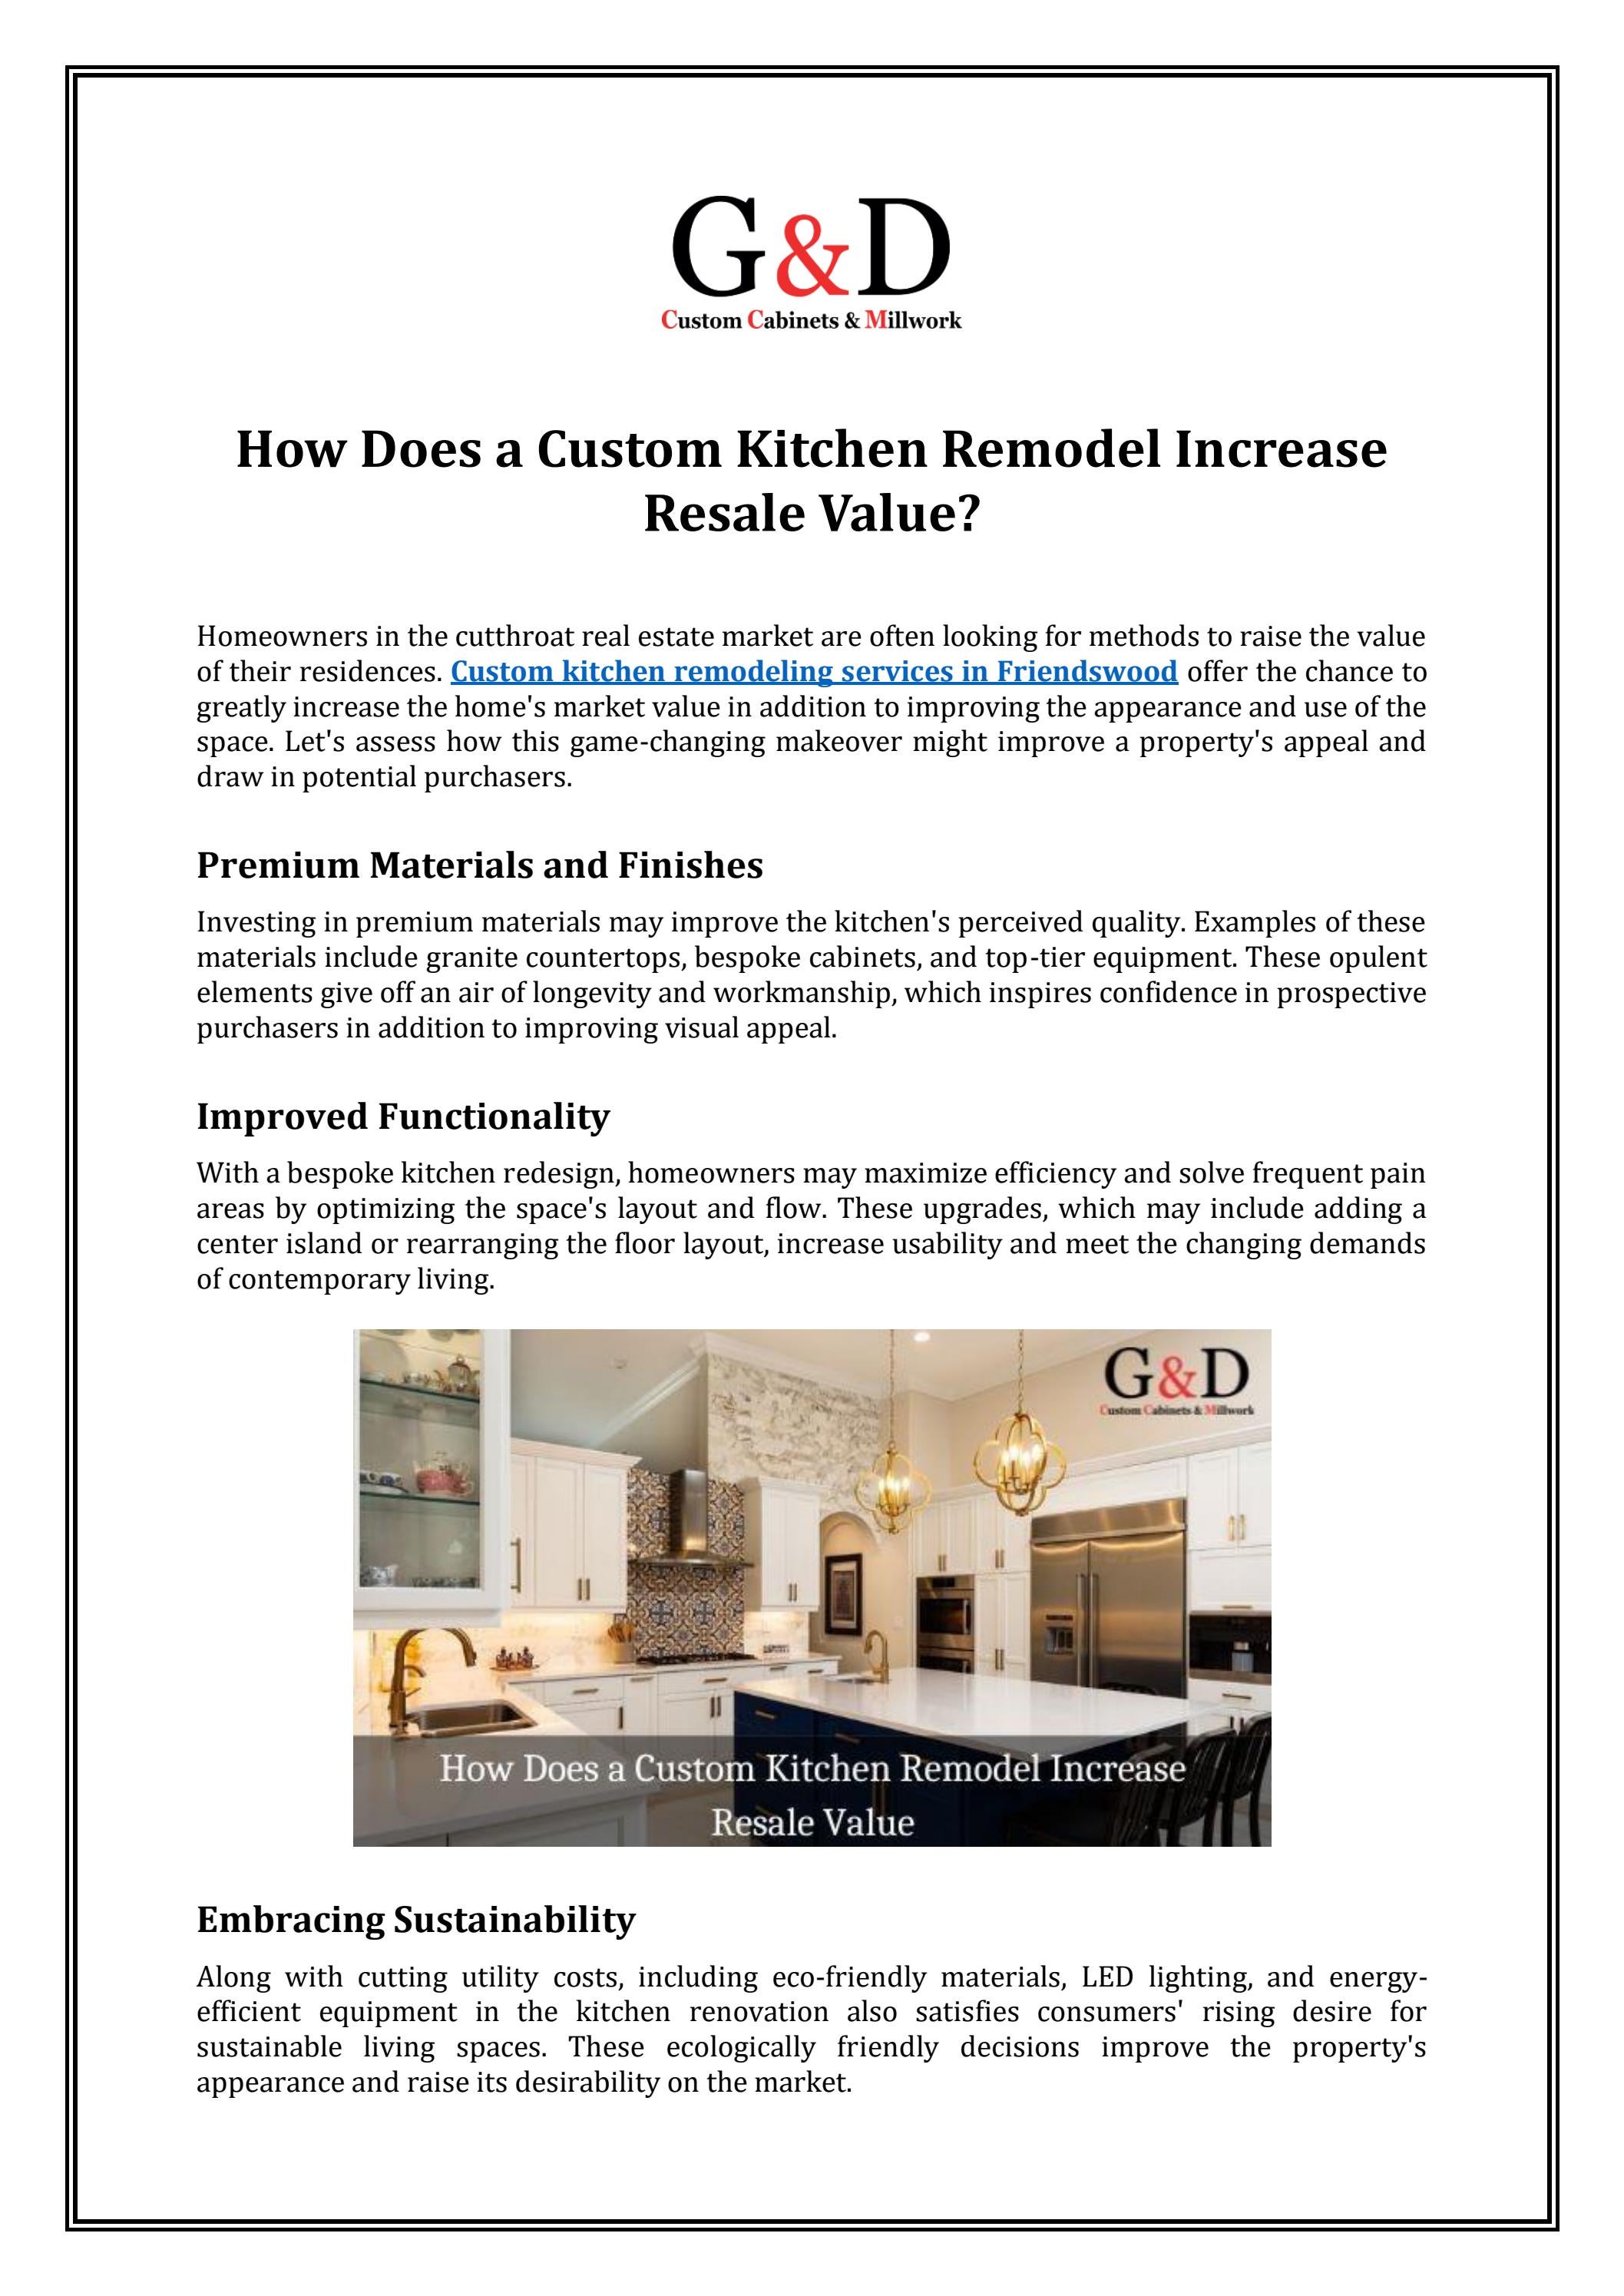 How Does a Custom Kitchen Remodel Increase Resale Value?